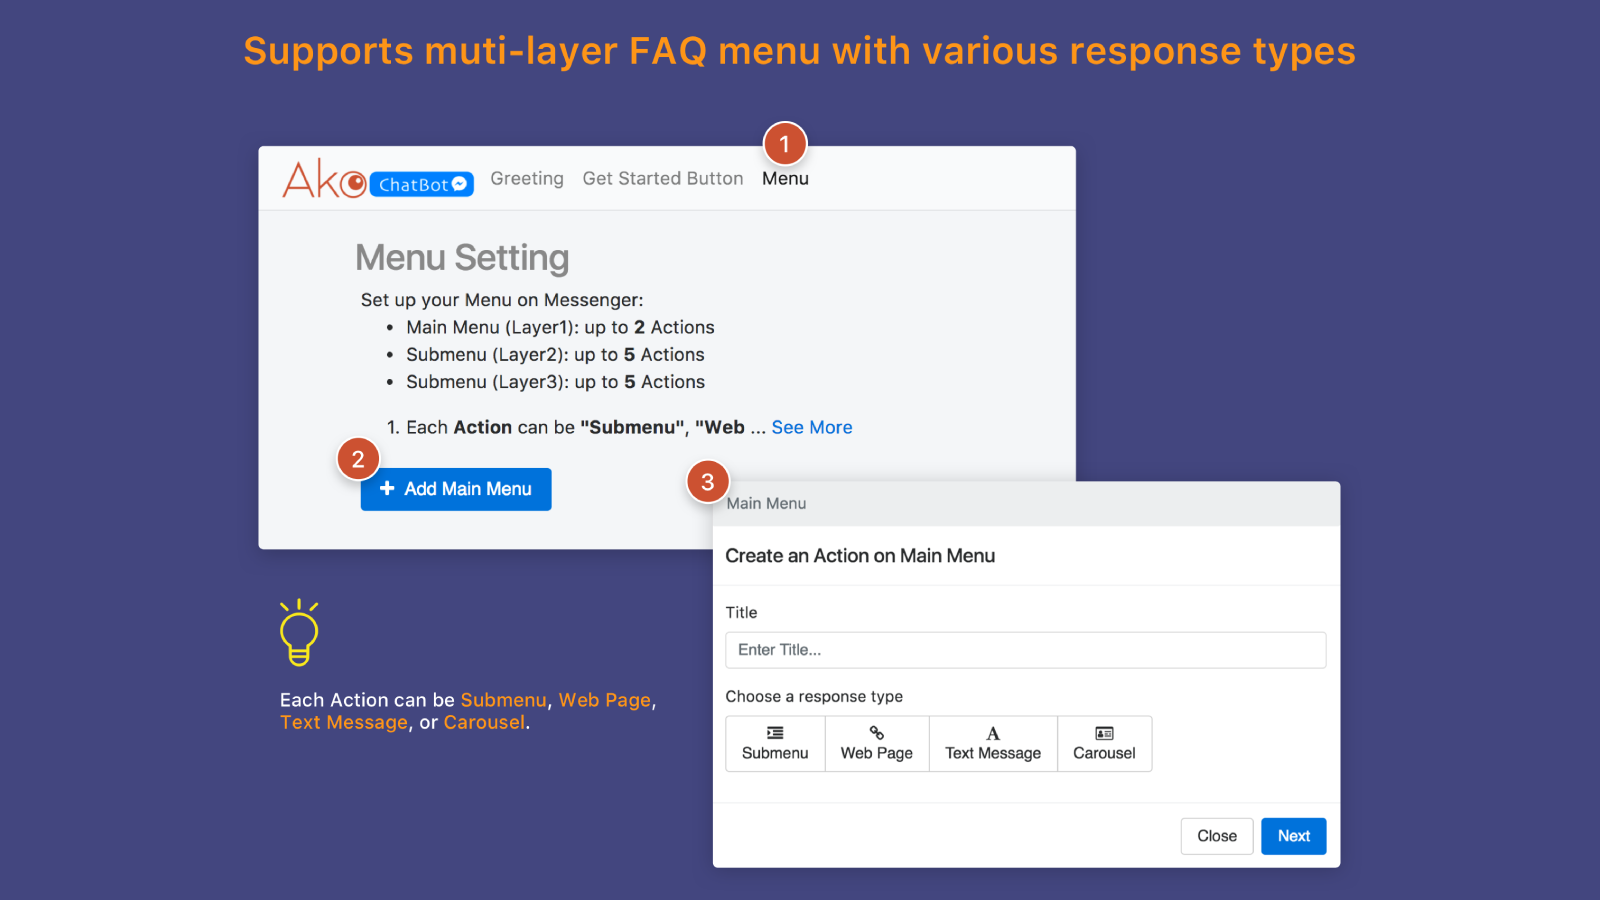 Support multi-layer FAQ menu with various response types